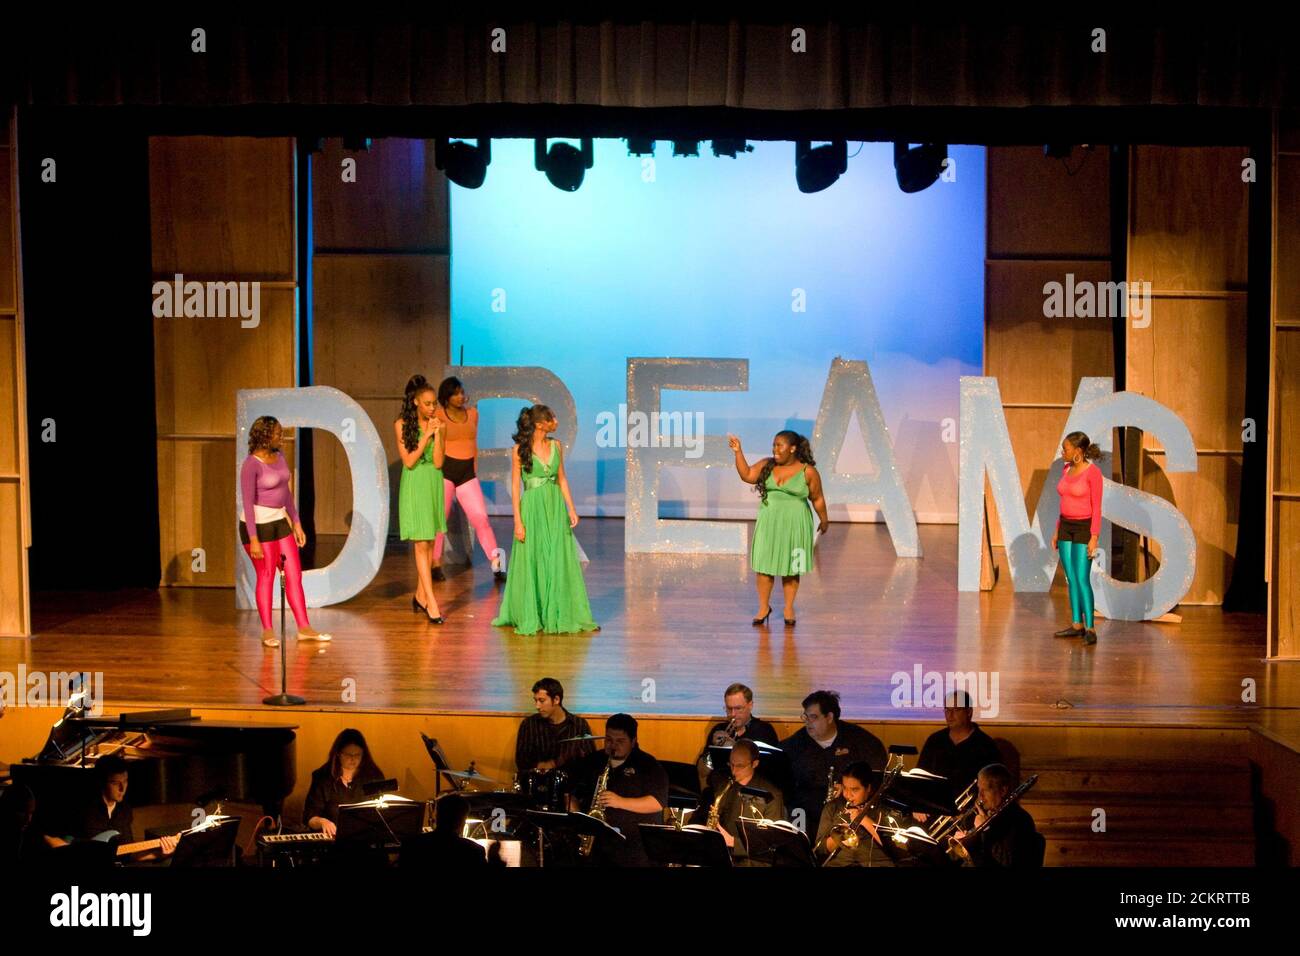 Austin, TX February 5, 2009: Reagan High School Blue Jesters production of 'Dreamgirls'. showing a rehearsal for the Dreamgirls trio (in green).  ©Chris Daemmrich / Daemmrich Photos Stock Photo